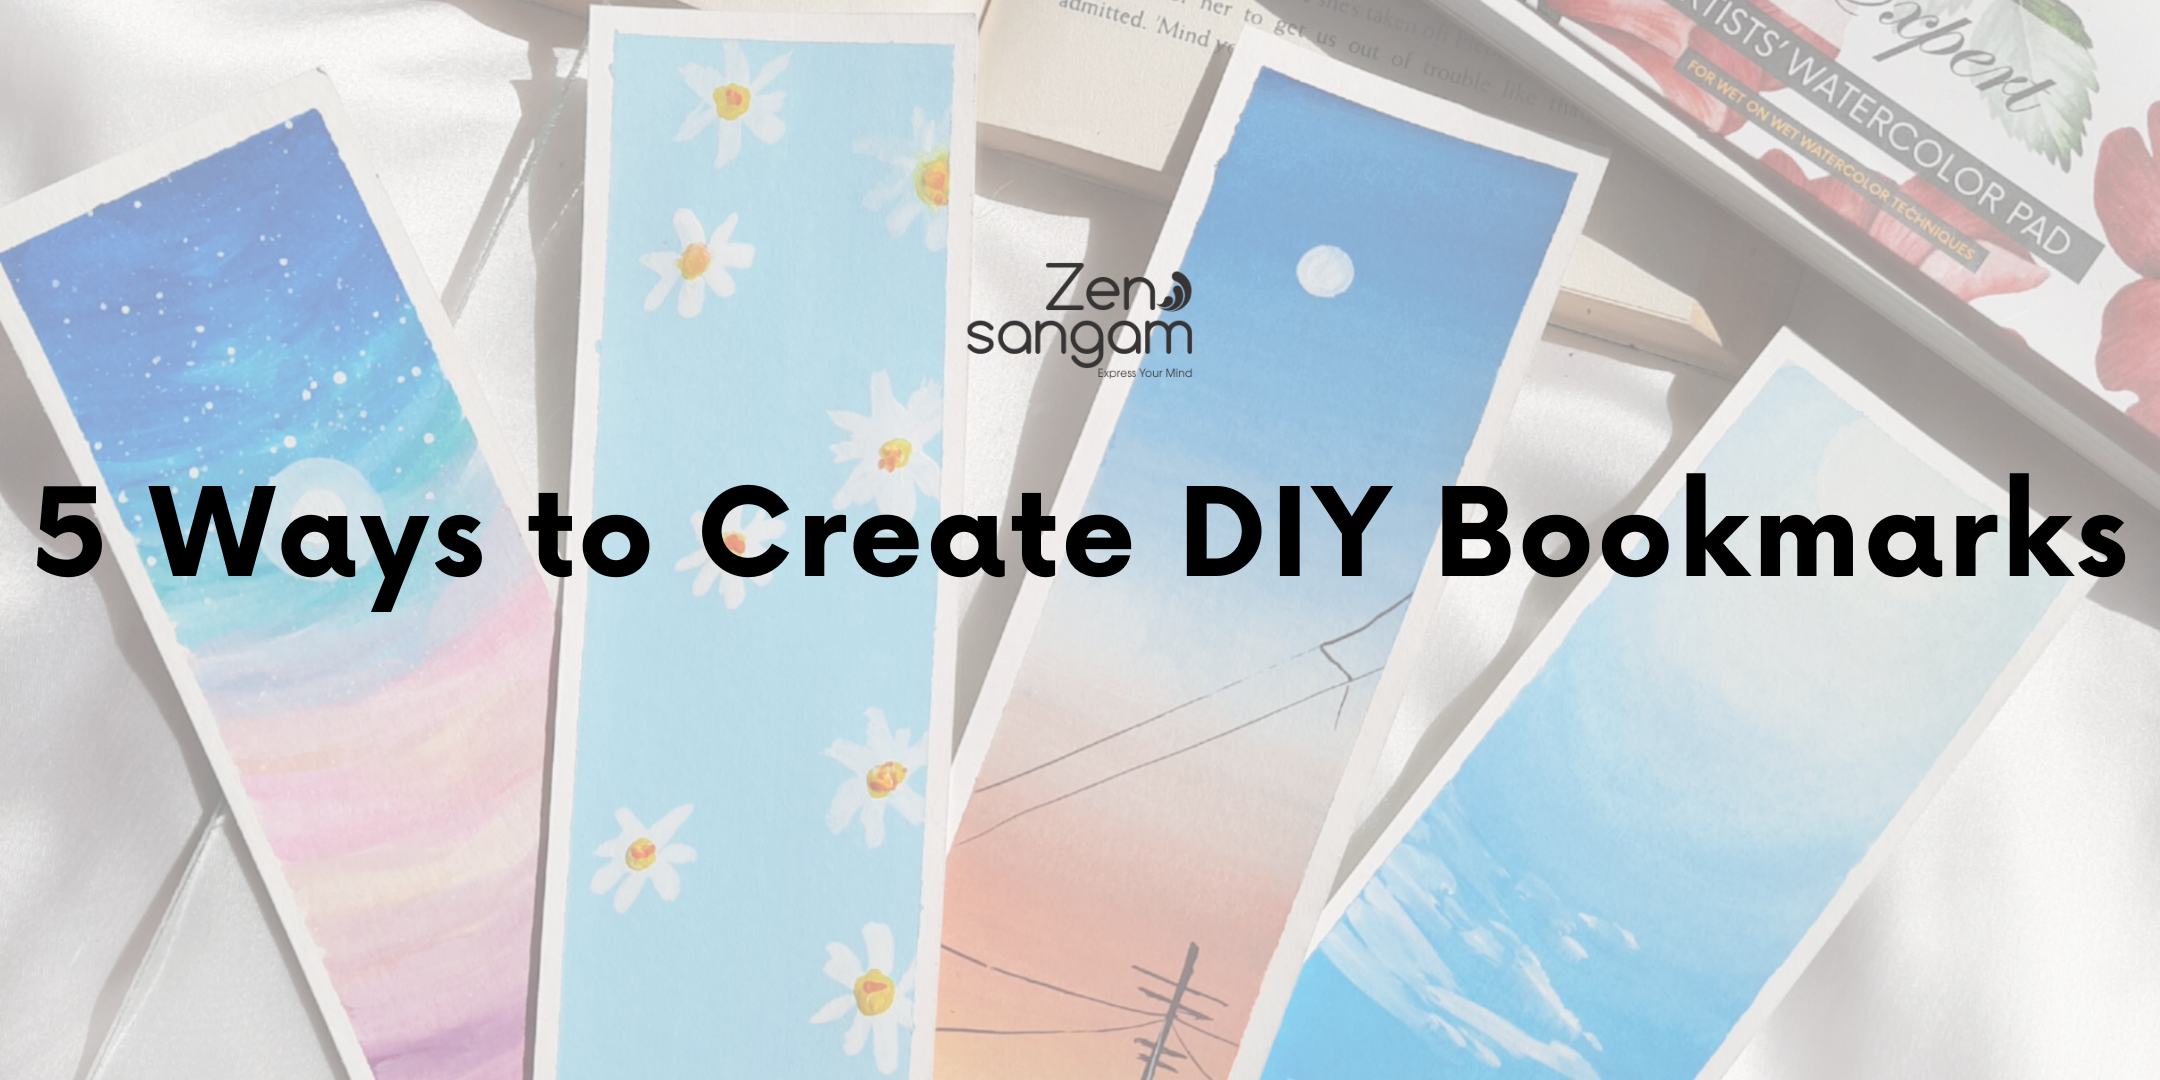 Easy DIY Bookmarks Made with Contact Paper